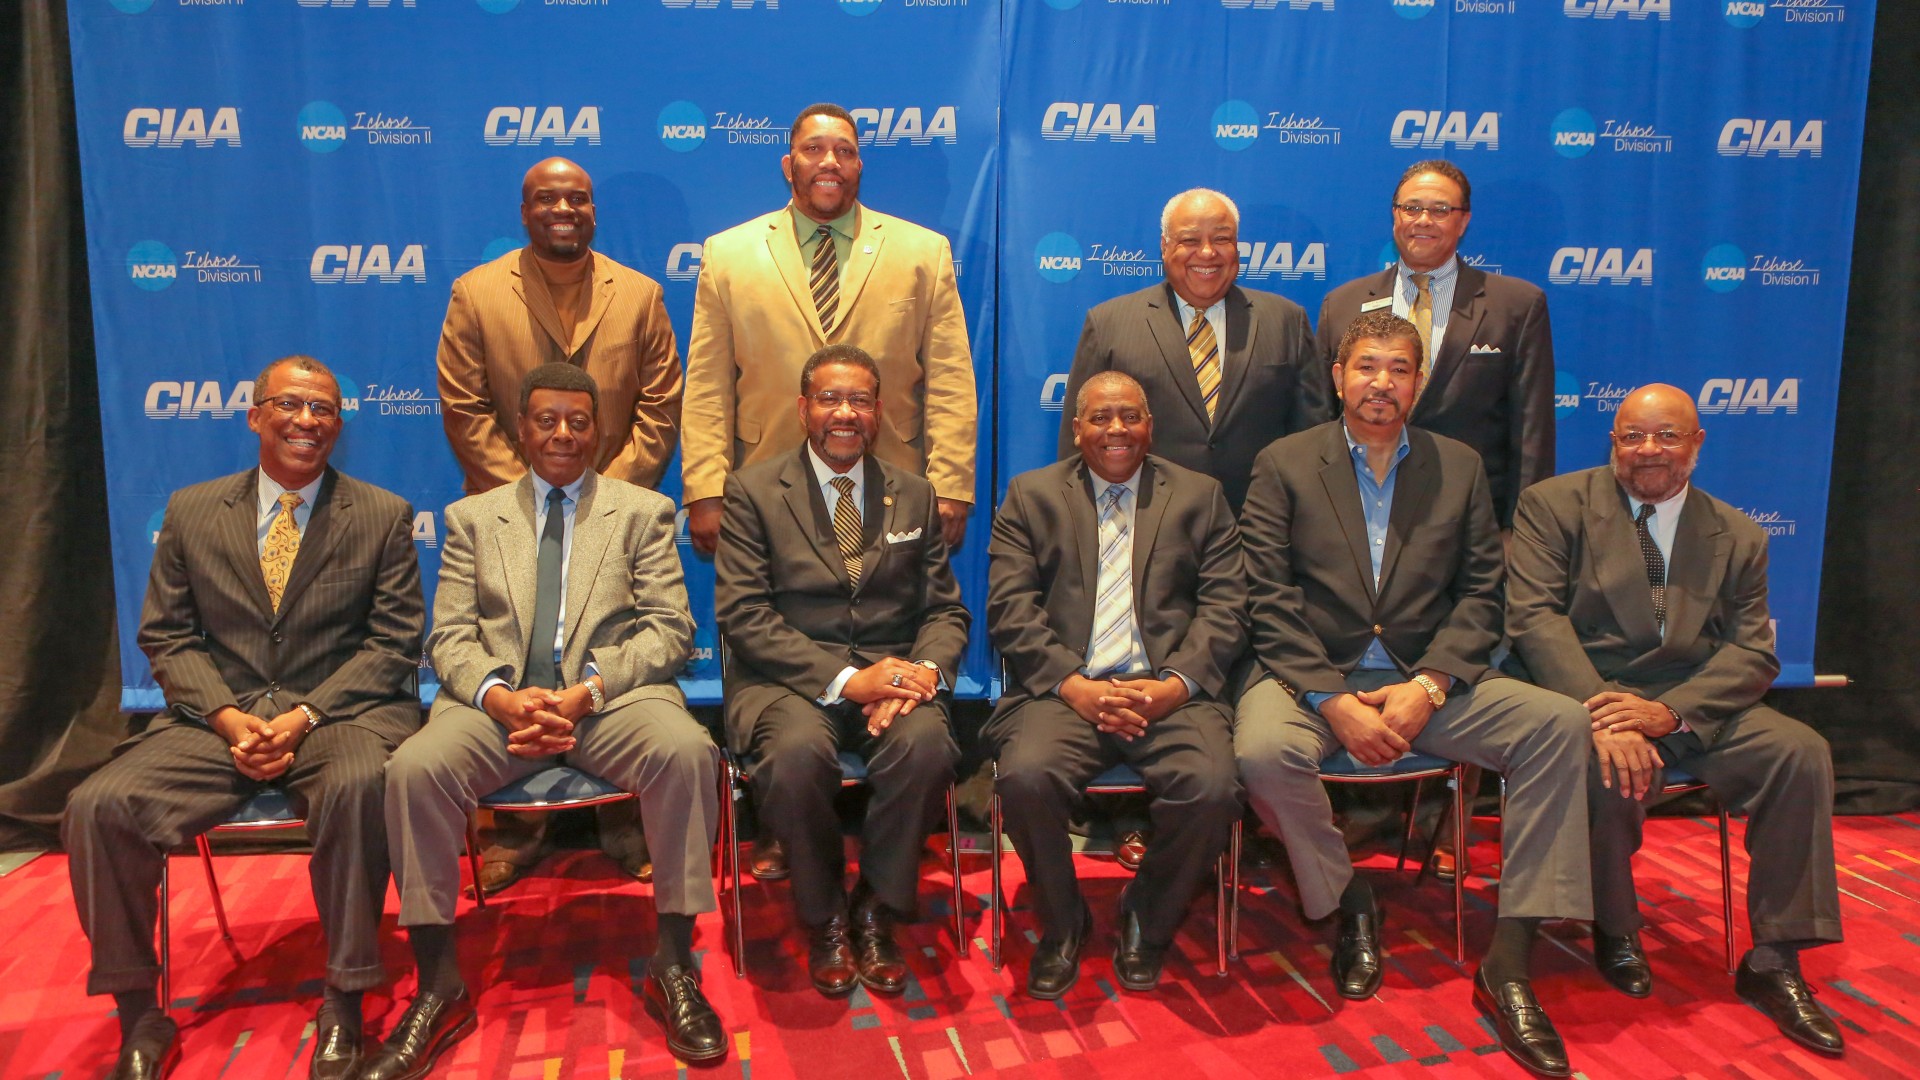 JCSU officials at the CIAA Hall of Fame Induction Ceremony of Steve Joyner